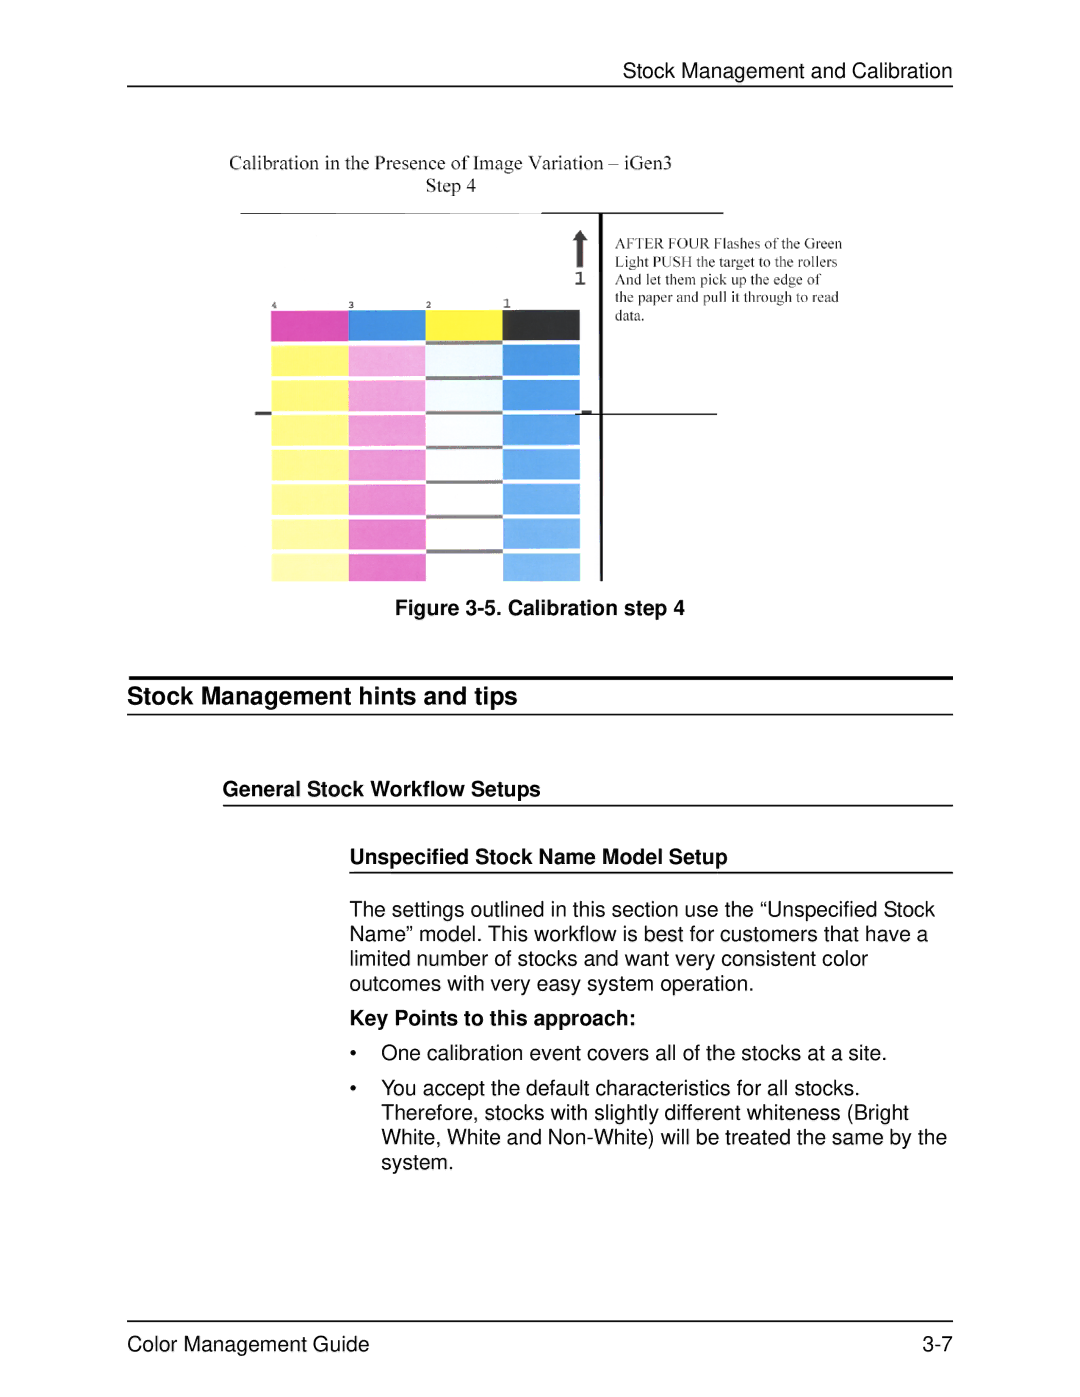 Xerox 701P40210 manual Stock Management hints and tips, Key Points to this approach 